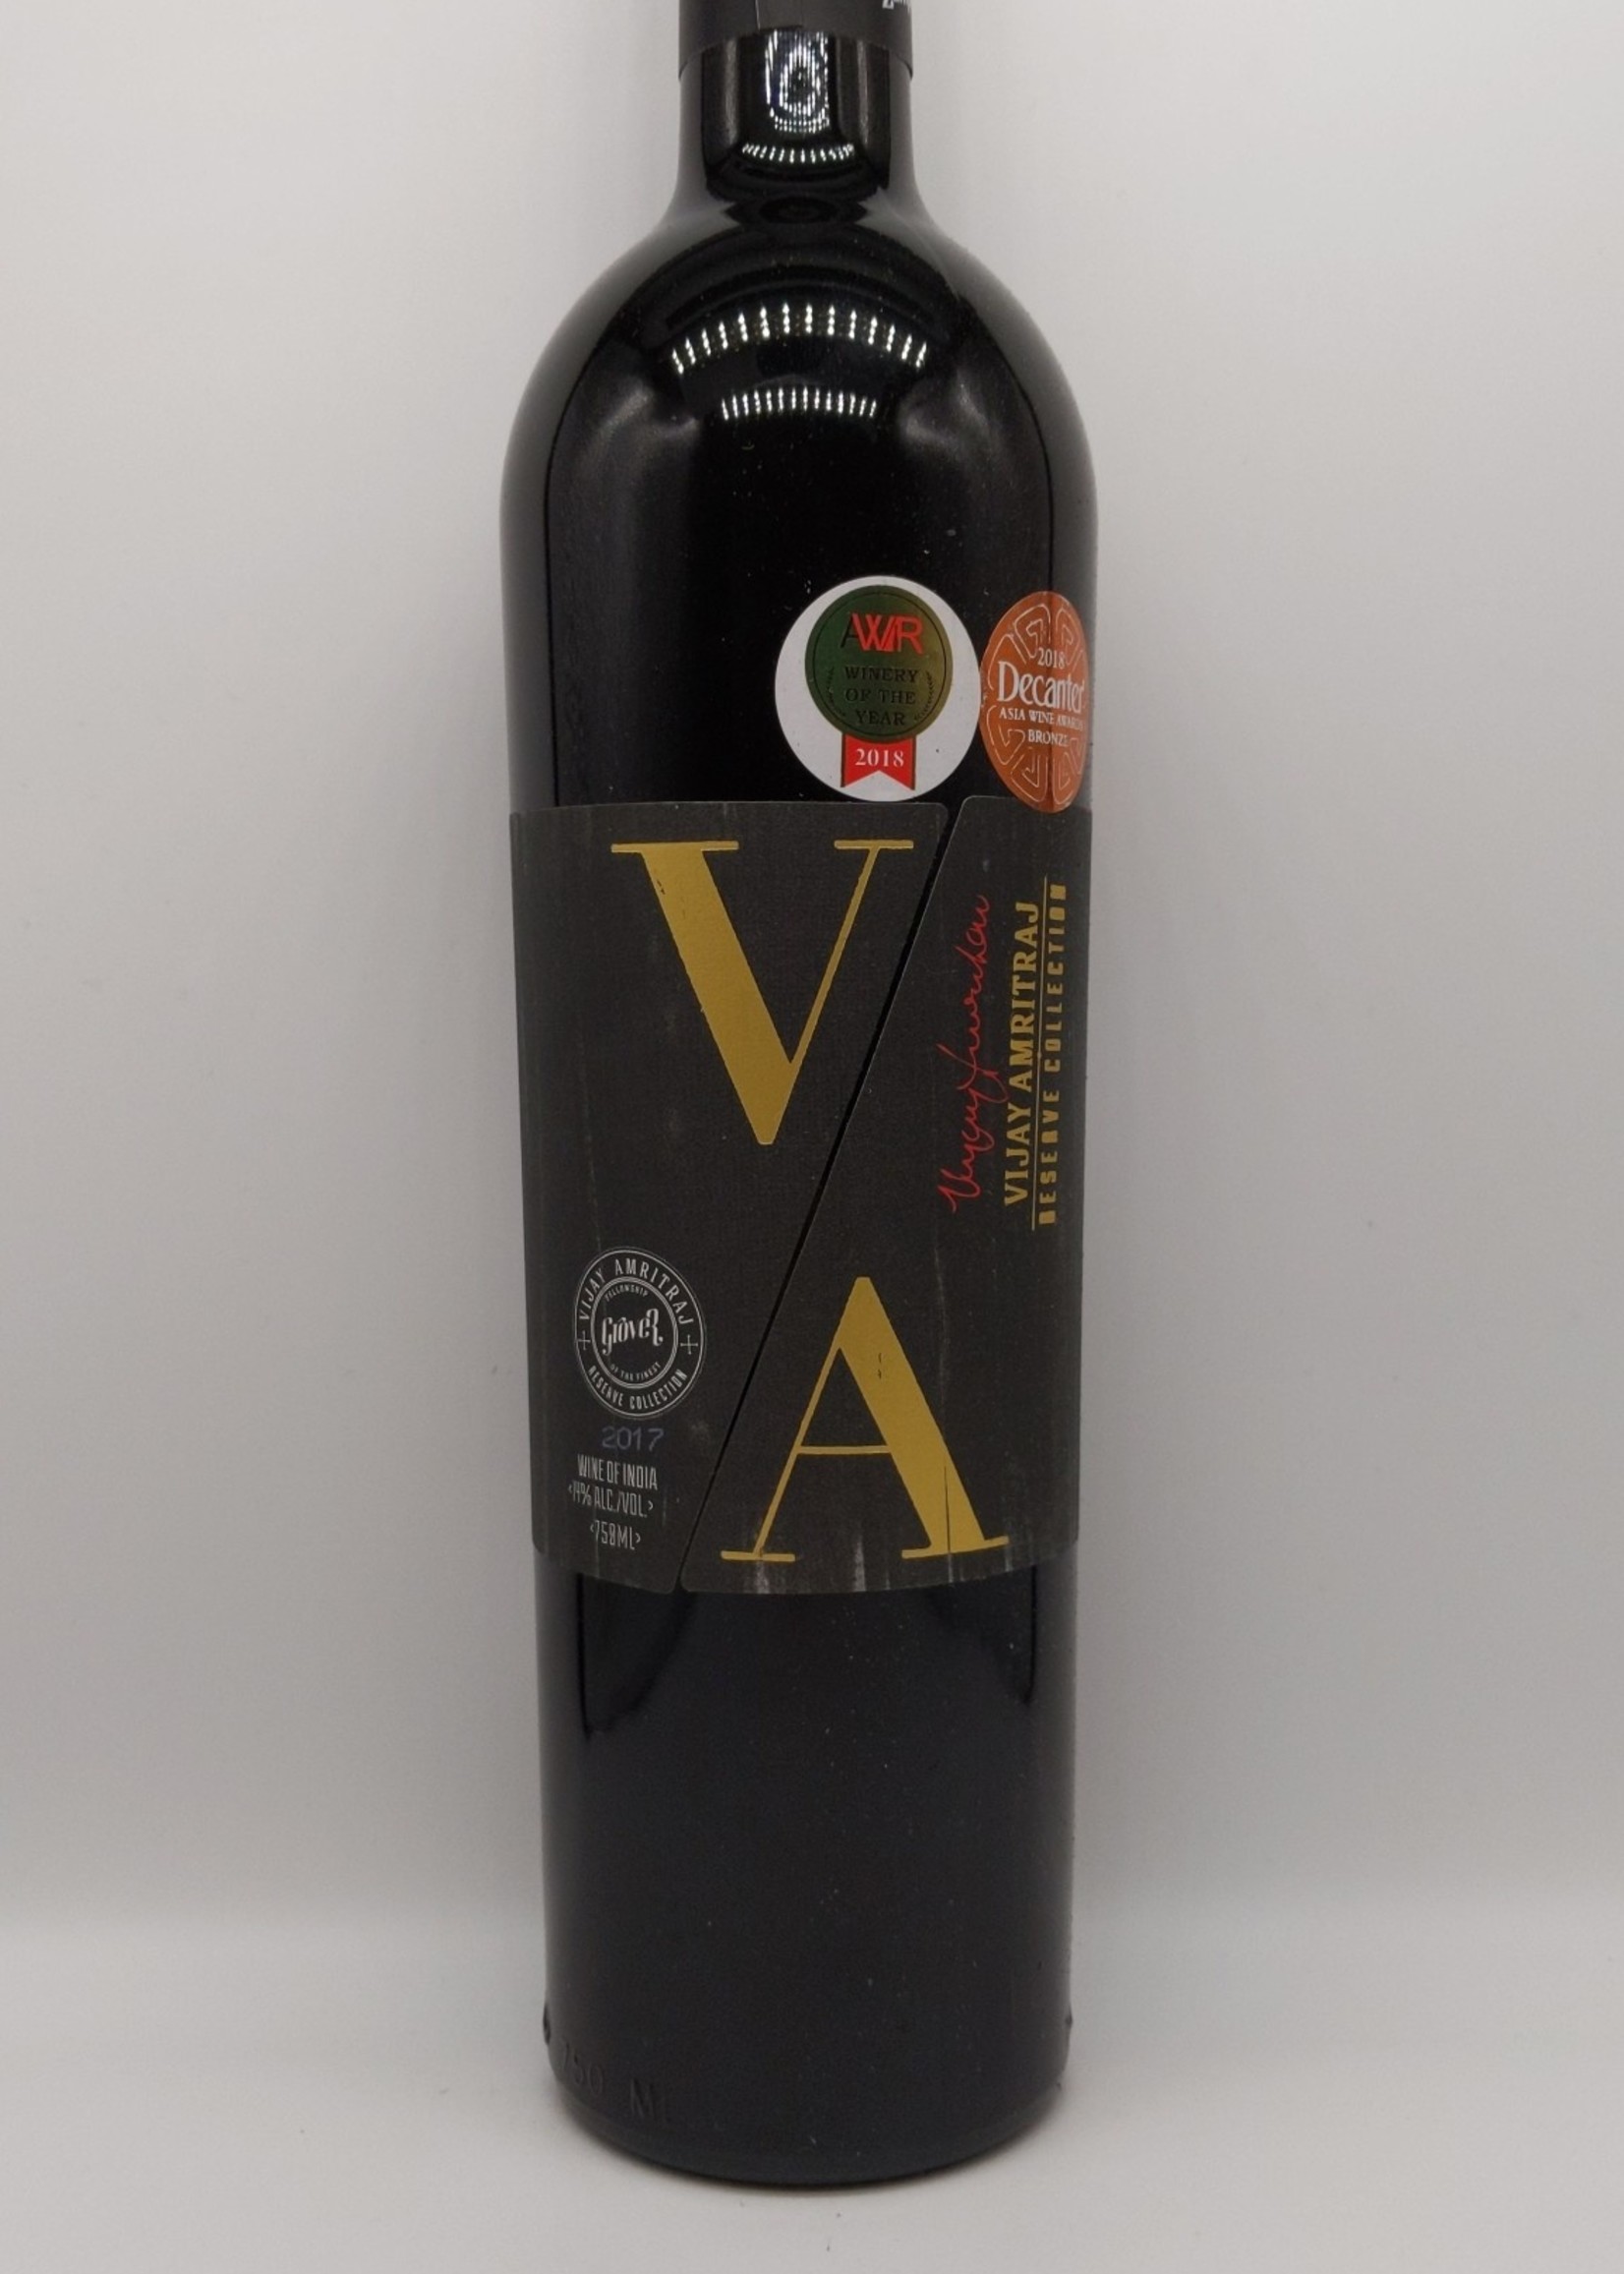 2017 GROVER ZAMPA VA RESERVE COLLECTION RED 750ml